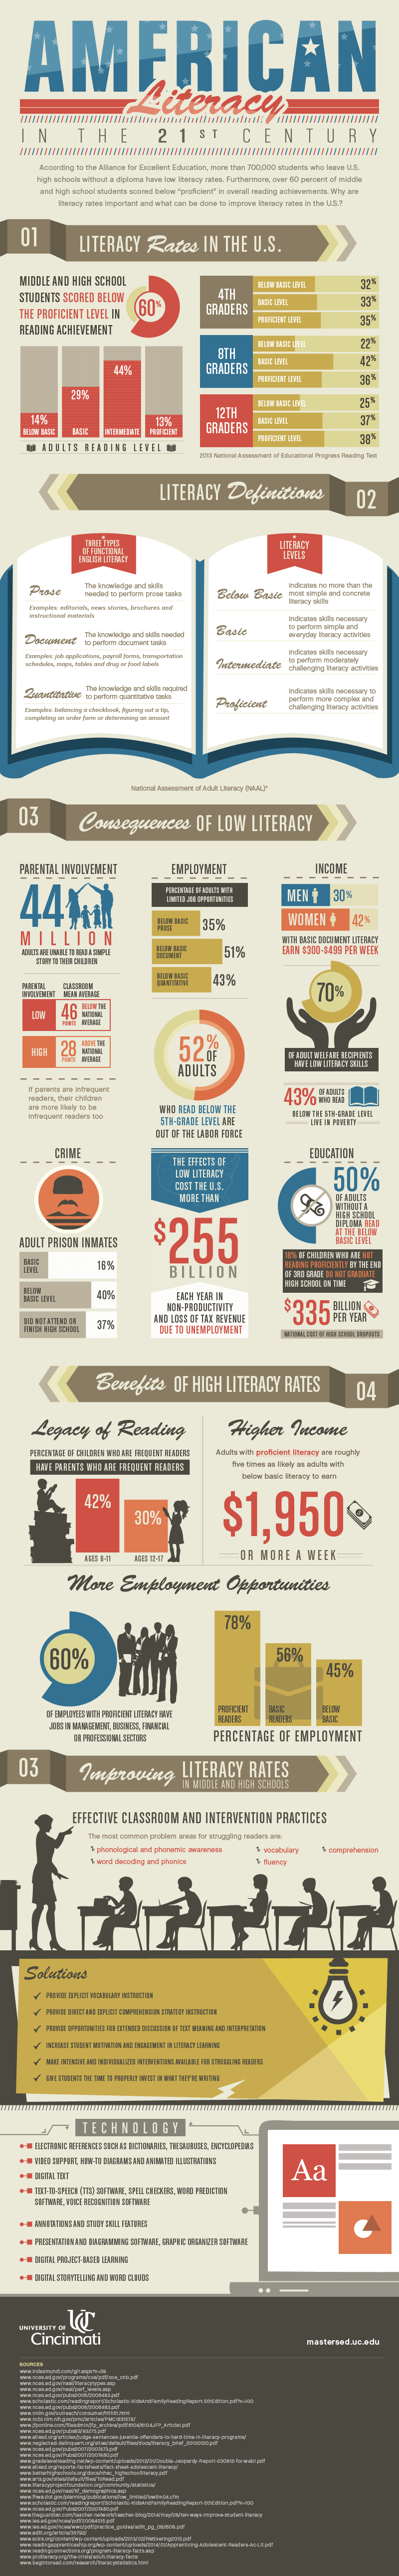 American Literacy infographic